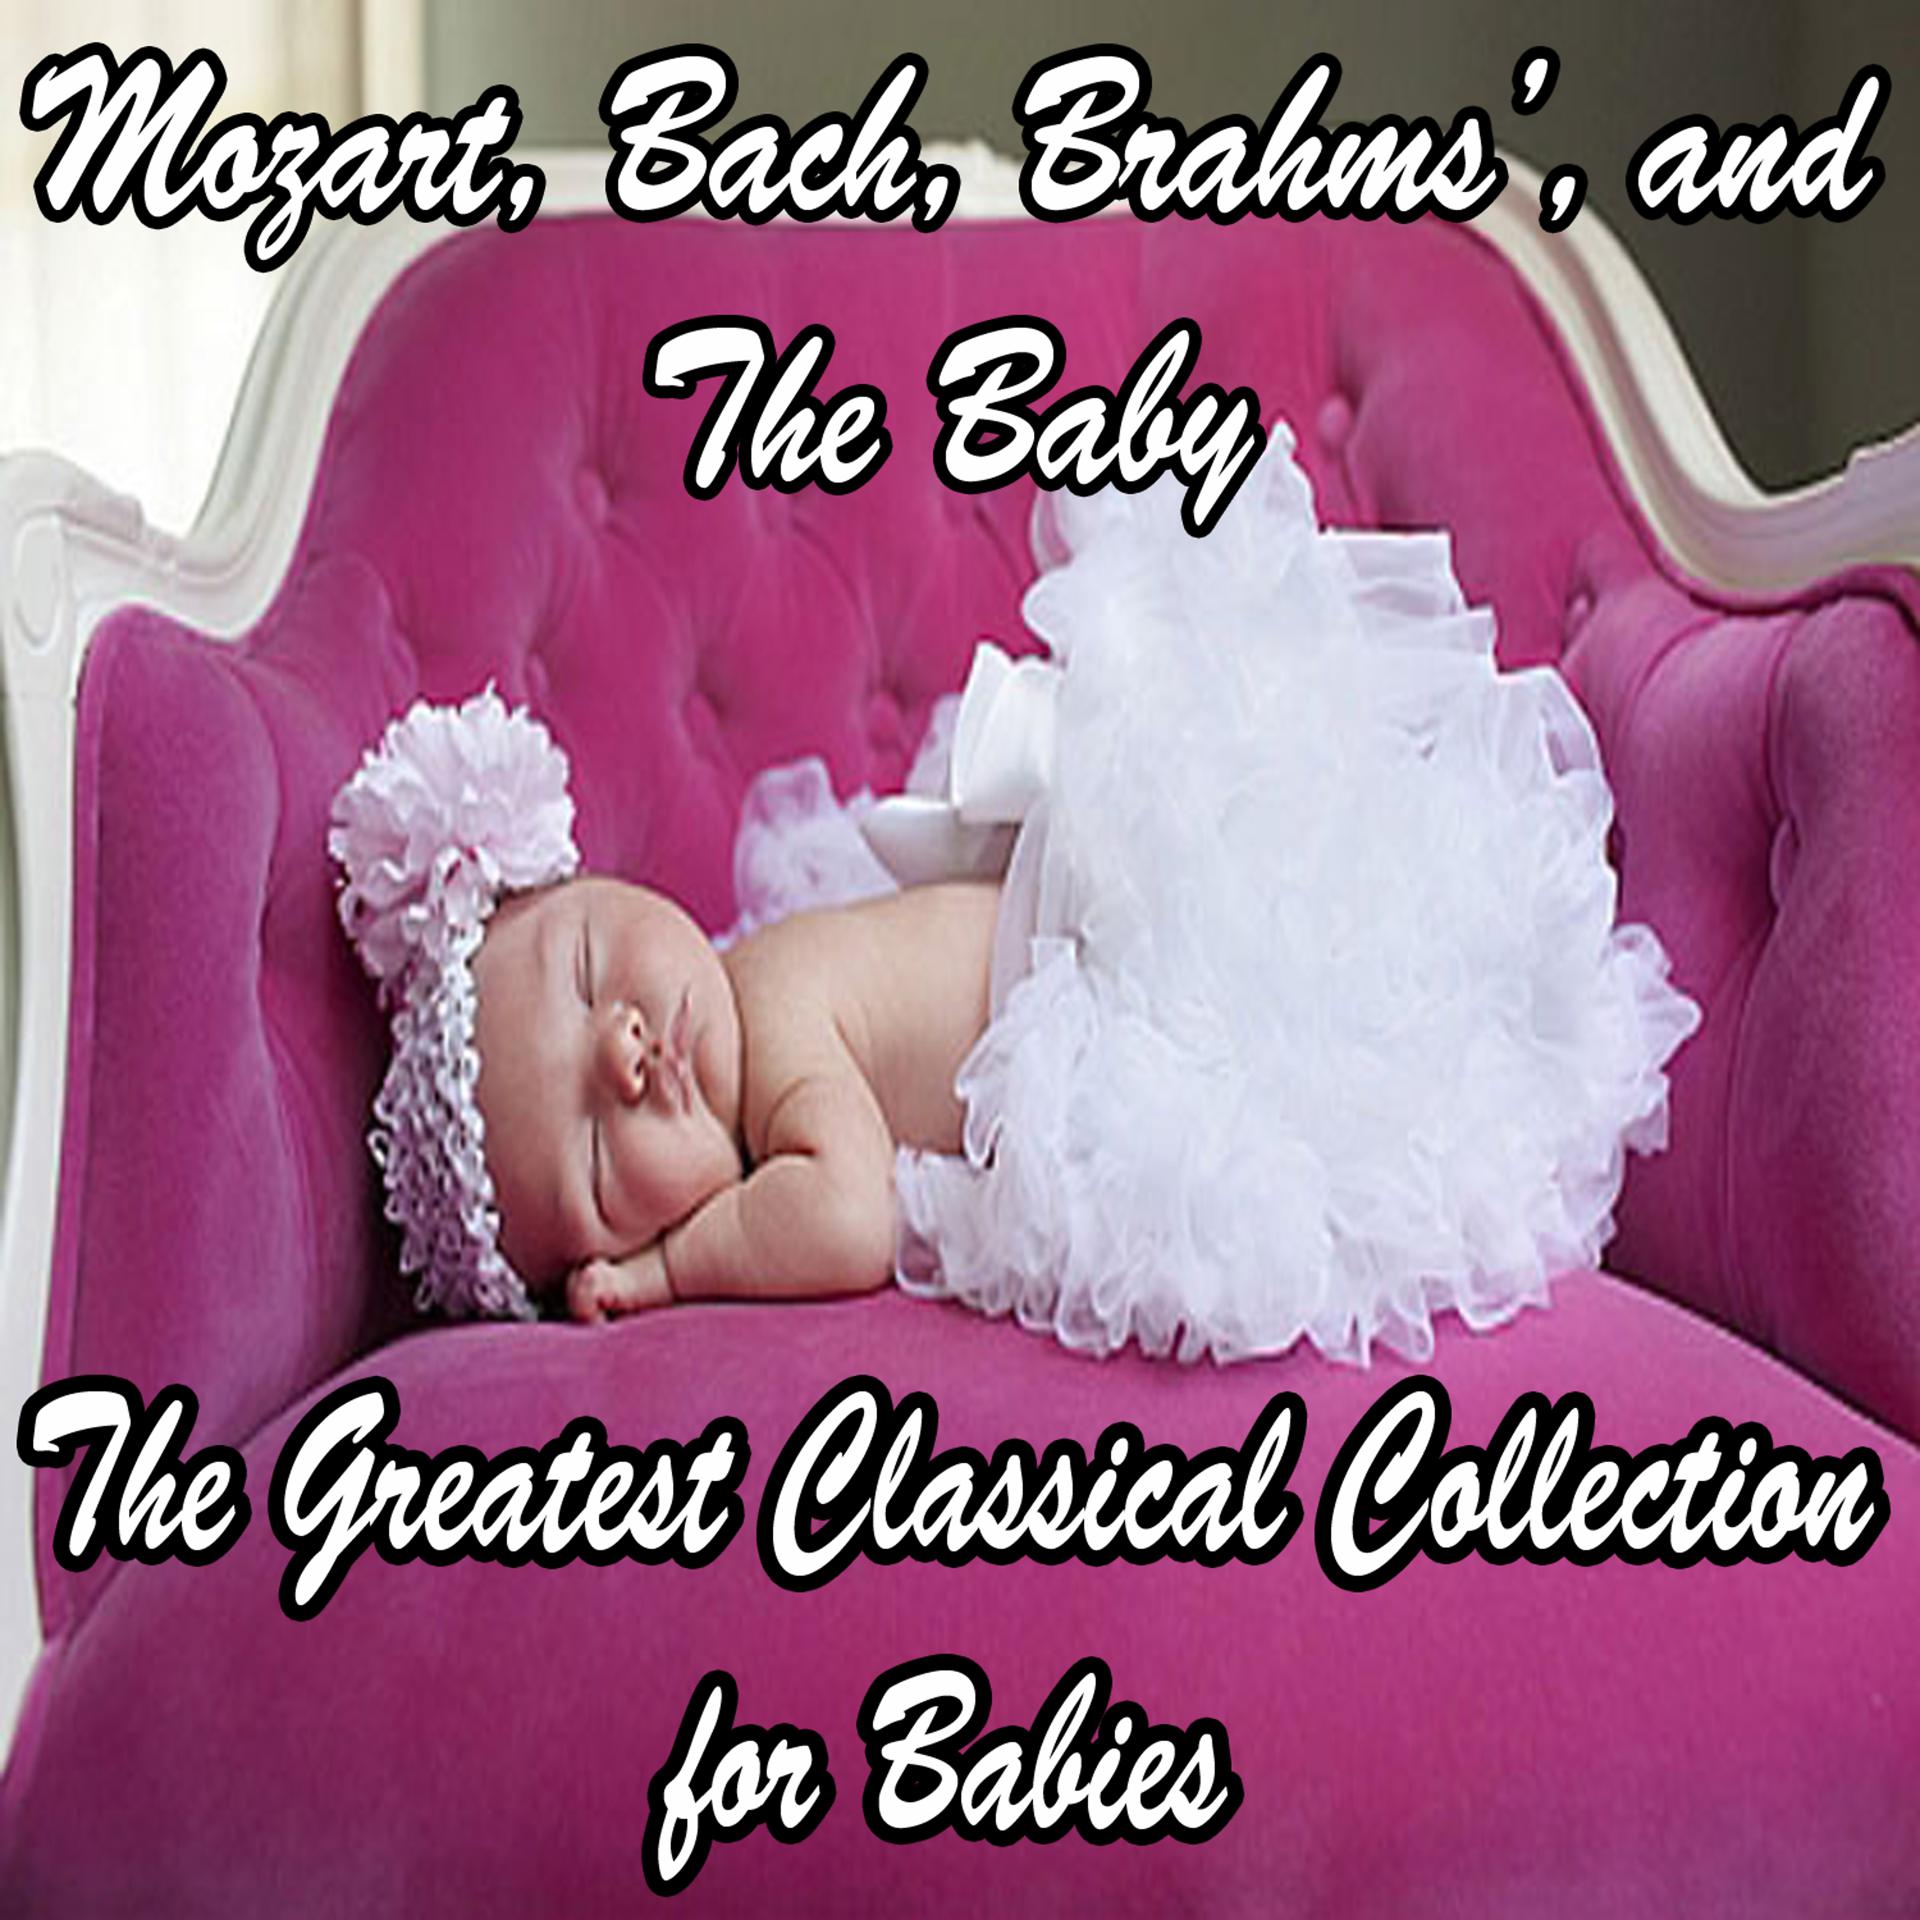 Постер альбома Mozart, Bach, Beethoven, Brahms, and The Baby: The Greatest Classical Collection for Babies